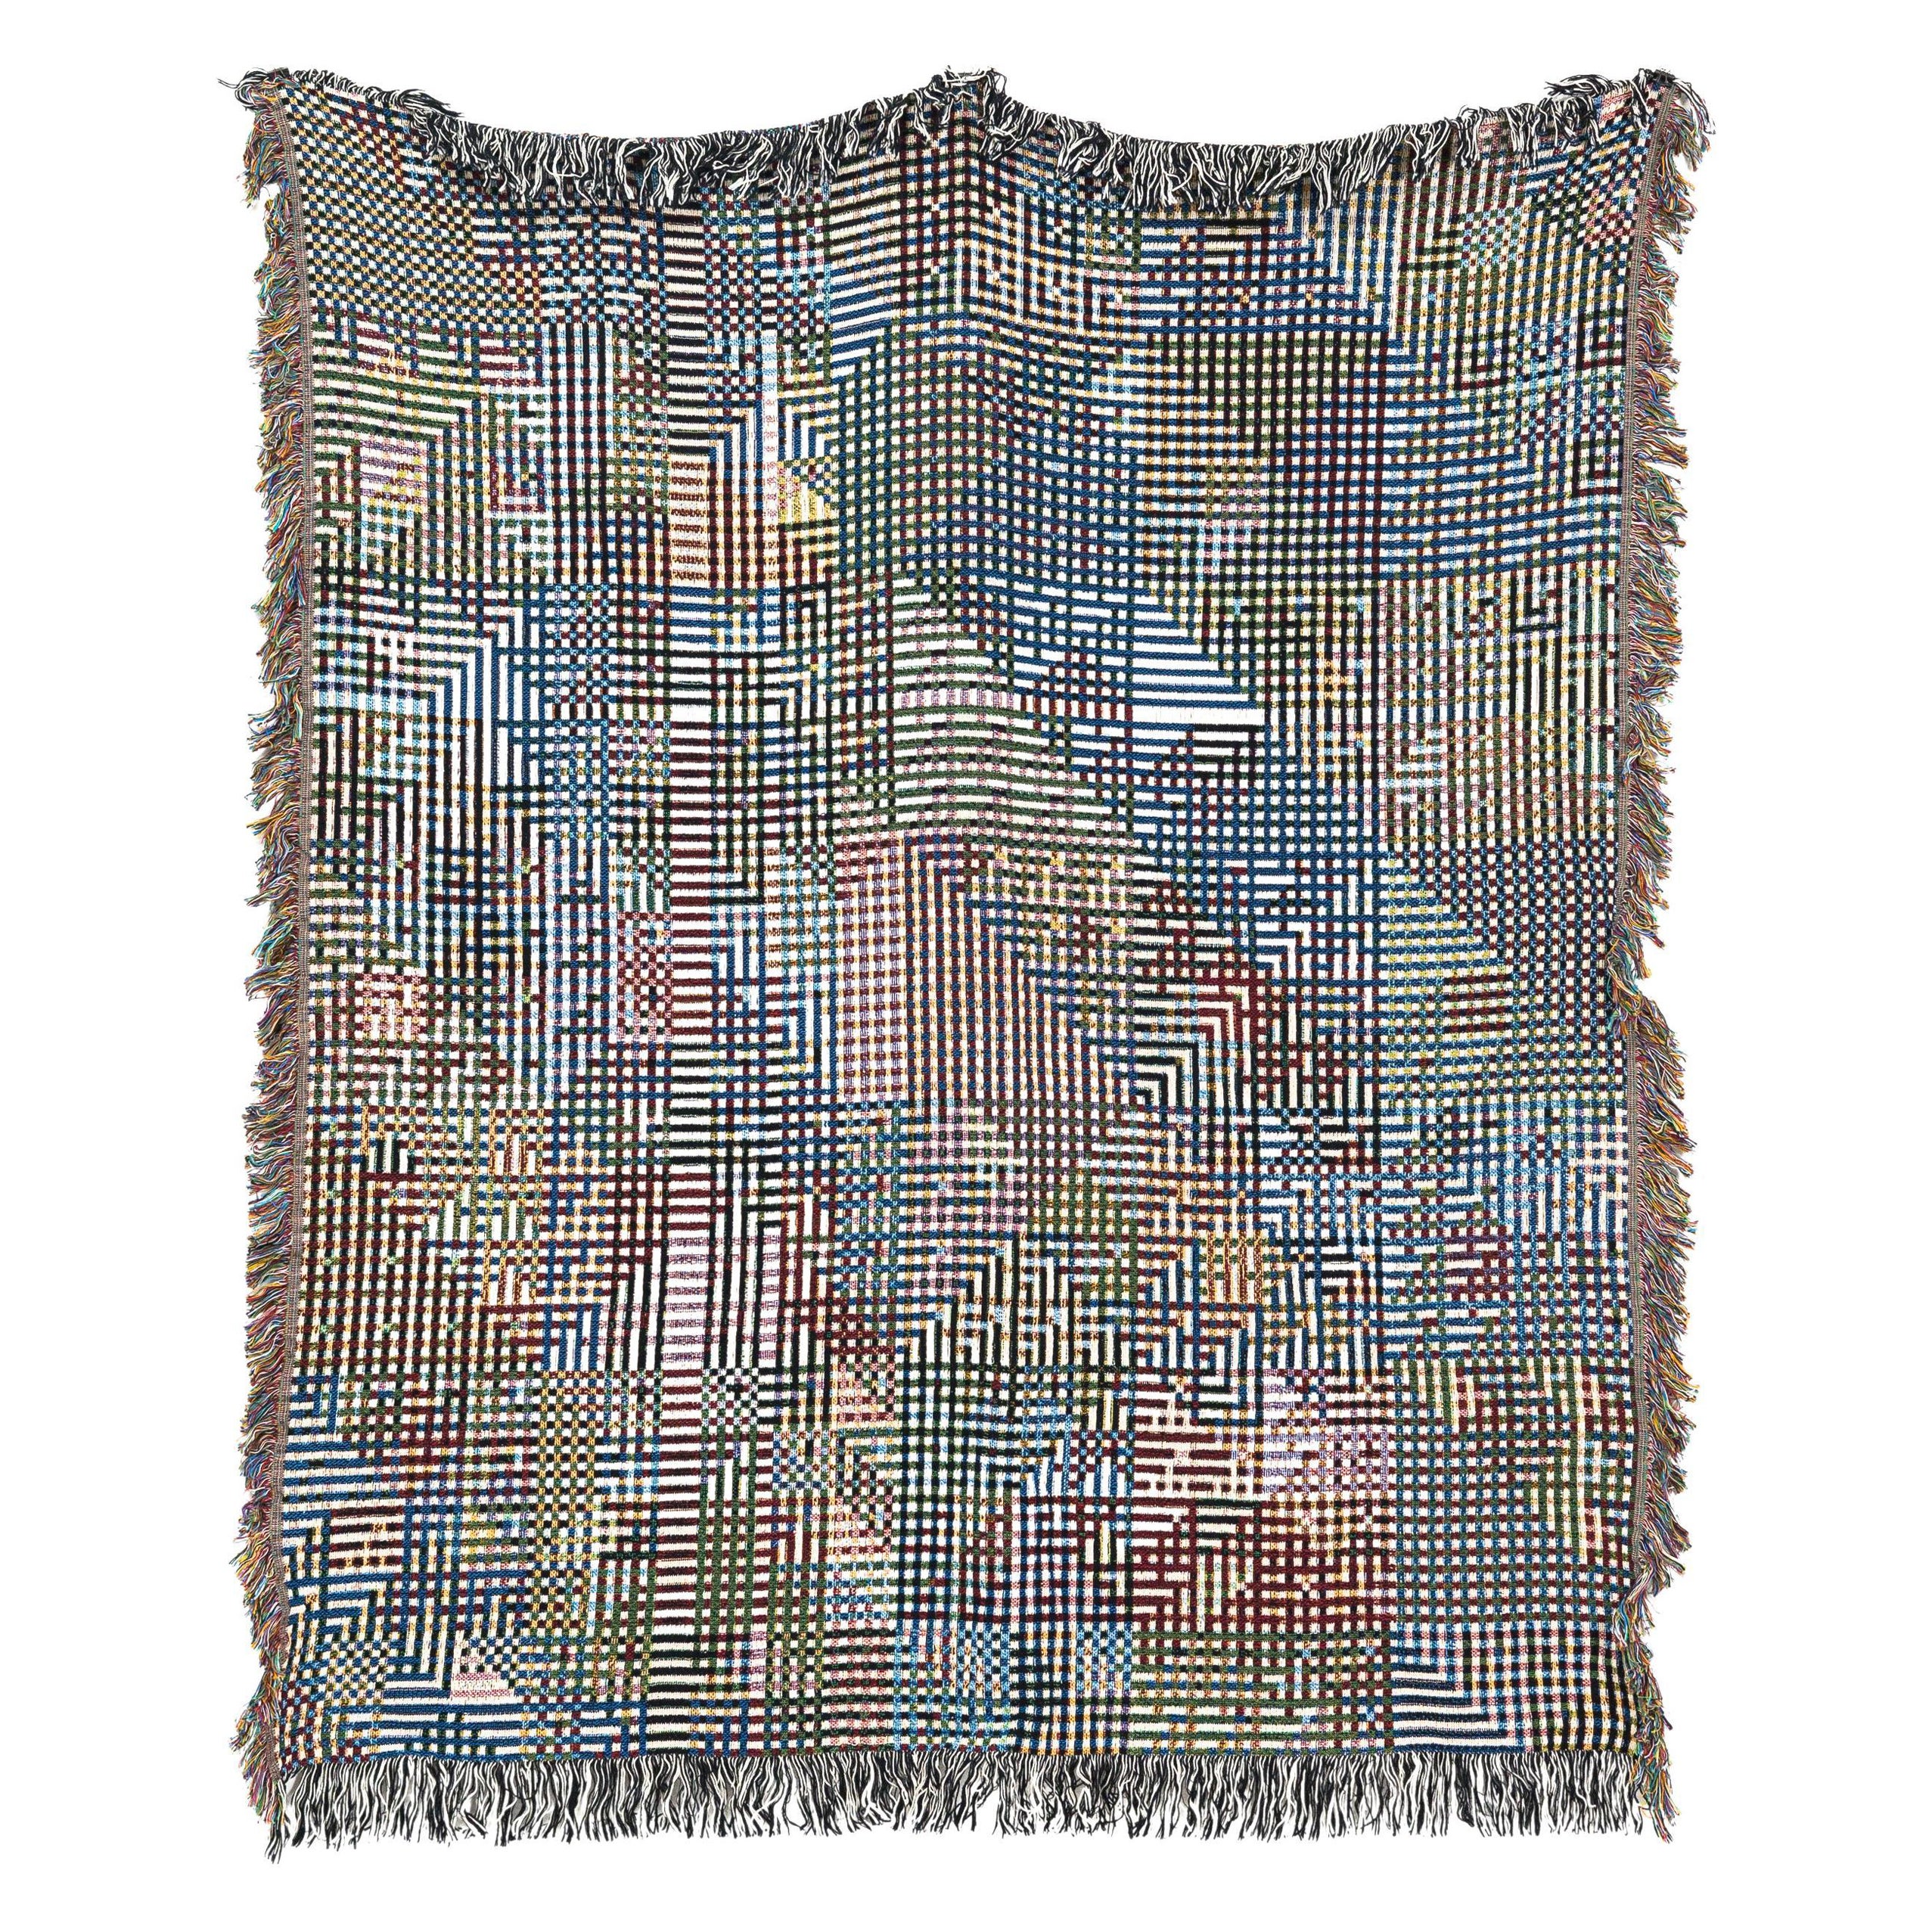 Bit Map 01, Luft Tanaka, Multicolor Graphic Woven Cotton Throw Blanket, 60"x80"